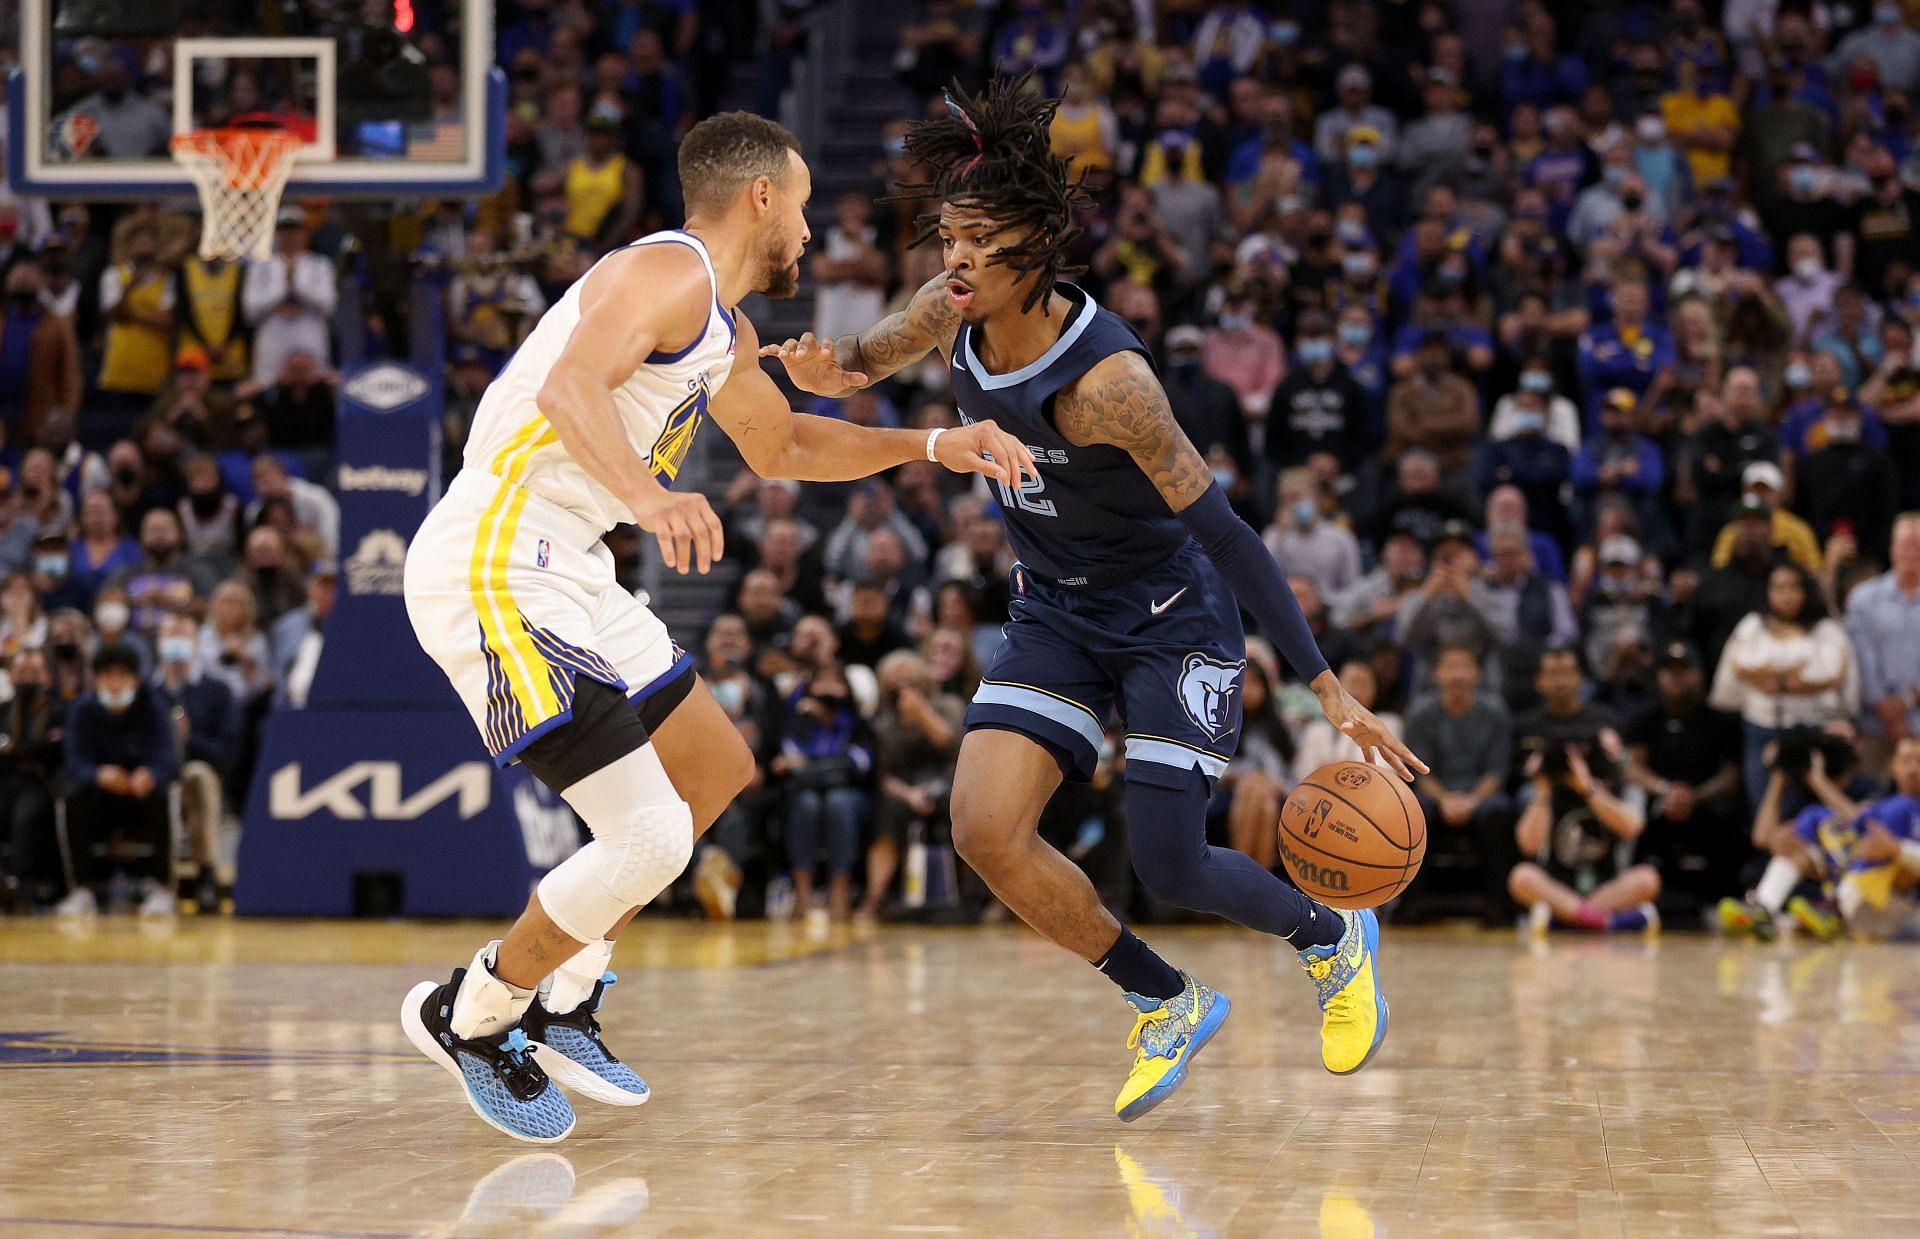 Steph Curry versus Ja Morant could be the biggest highlight of NBA Rivals Week.